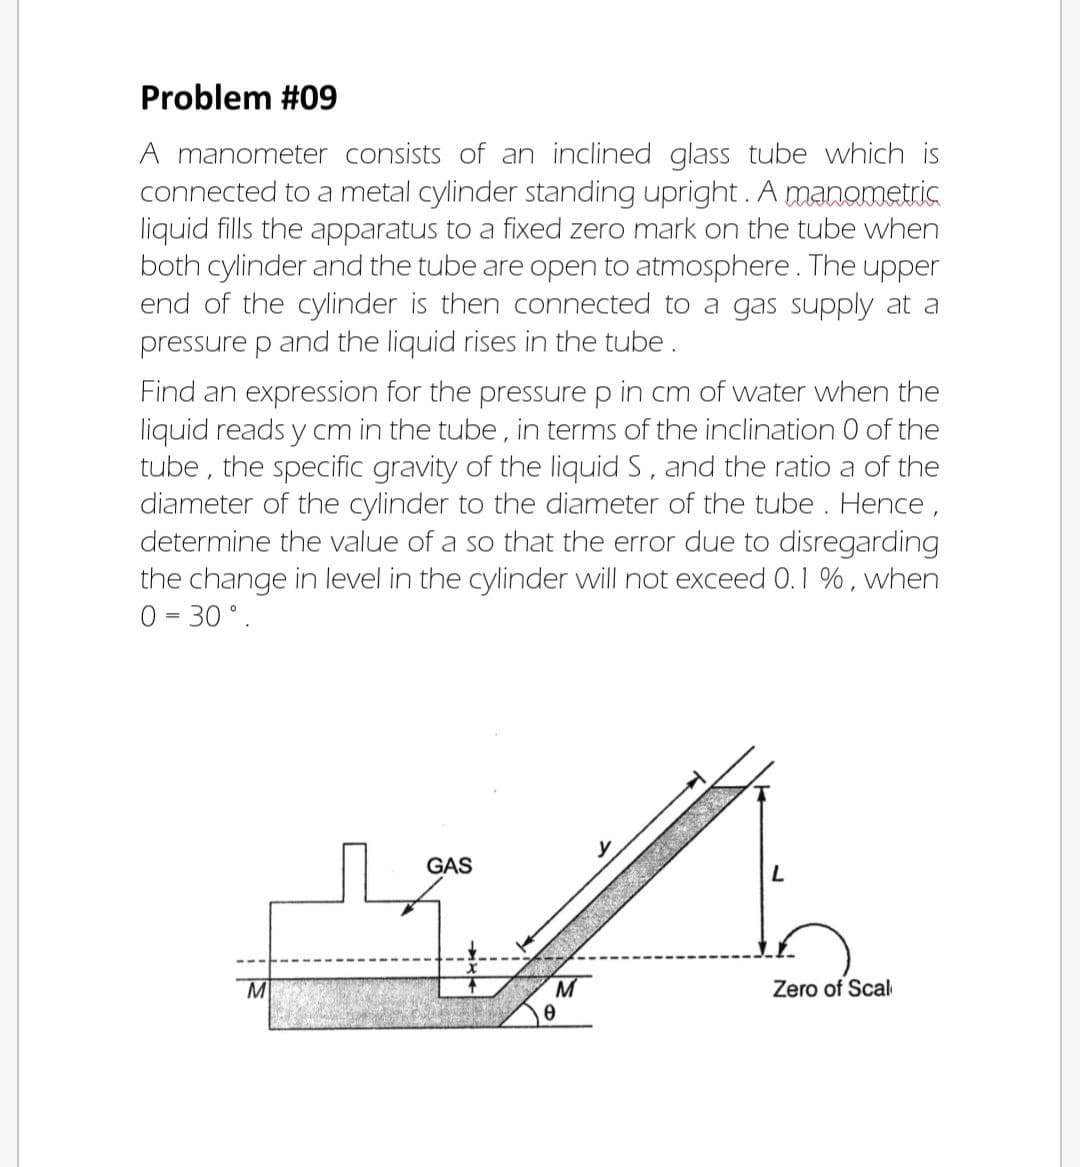 Problem #09
A manometer consists of an inclined glass tube which is
connected to a metal cylinder standing upright. A manometris
liquid fills the apparatus to a fixed zero mark on the tube when
both cylinder and the tube are open to atmosphere. The upper
end of the cylinder is then connected to a gas supply at a
pressure p and the liquid rises in the tube.
Find an expression for the pressure p in cm of water when the
liquid reads y cm in the tube, in terms of the inclination 0 of the
tube , the specific gravity of the liquid S, and the ratio a of the
diameter of the cylinder to the diameter of the tube . Hence,
determine the value of a so that the error due to disregarding
the change in level in the cylinder will not exceed 0.1 %, when
0 = 30 °.
GAS
M
M
Zero of Scal
